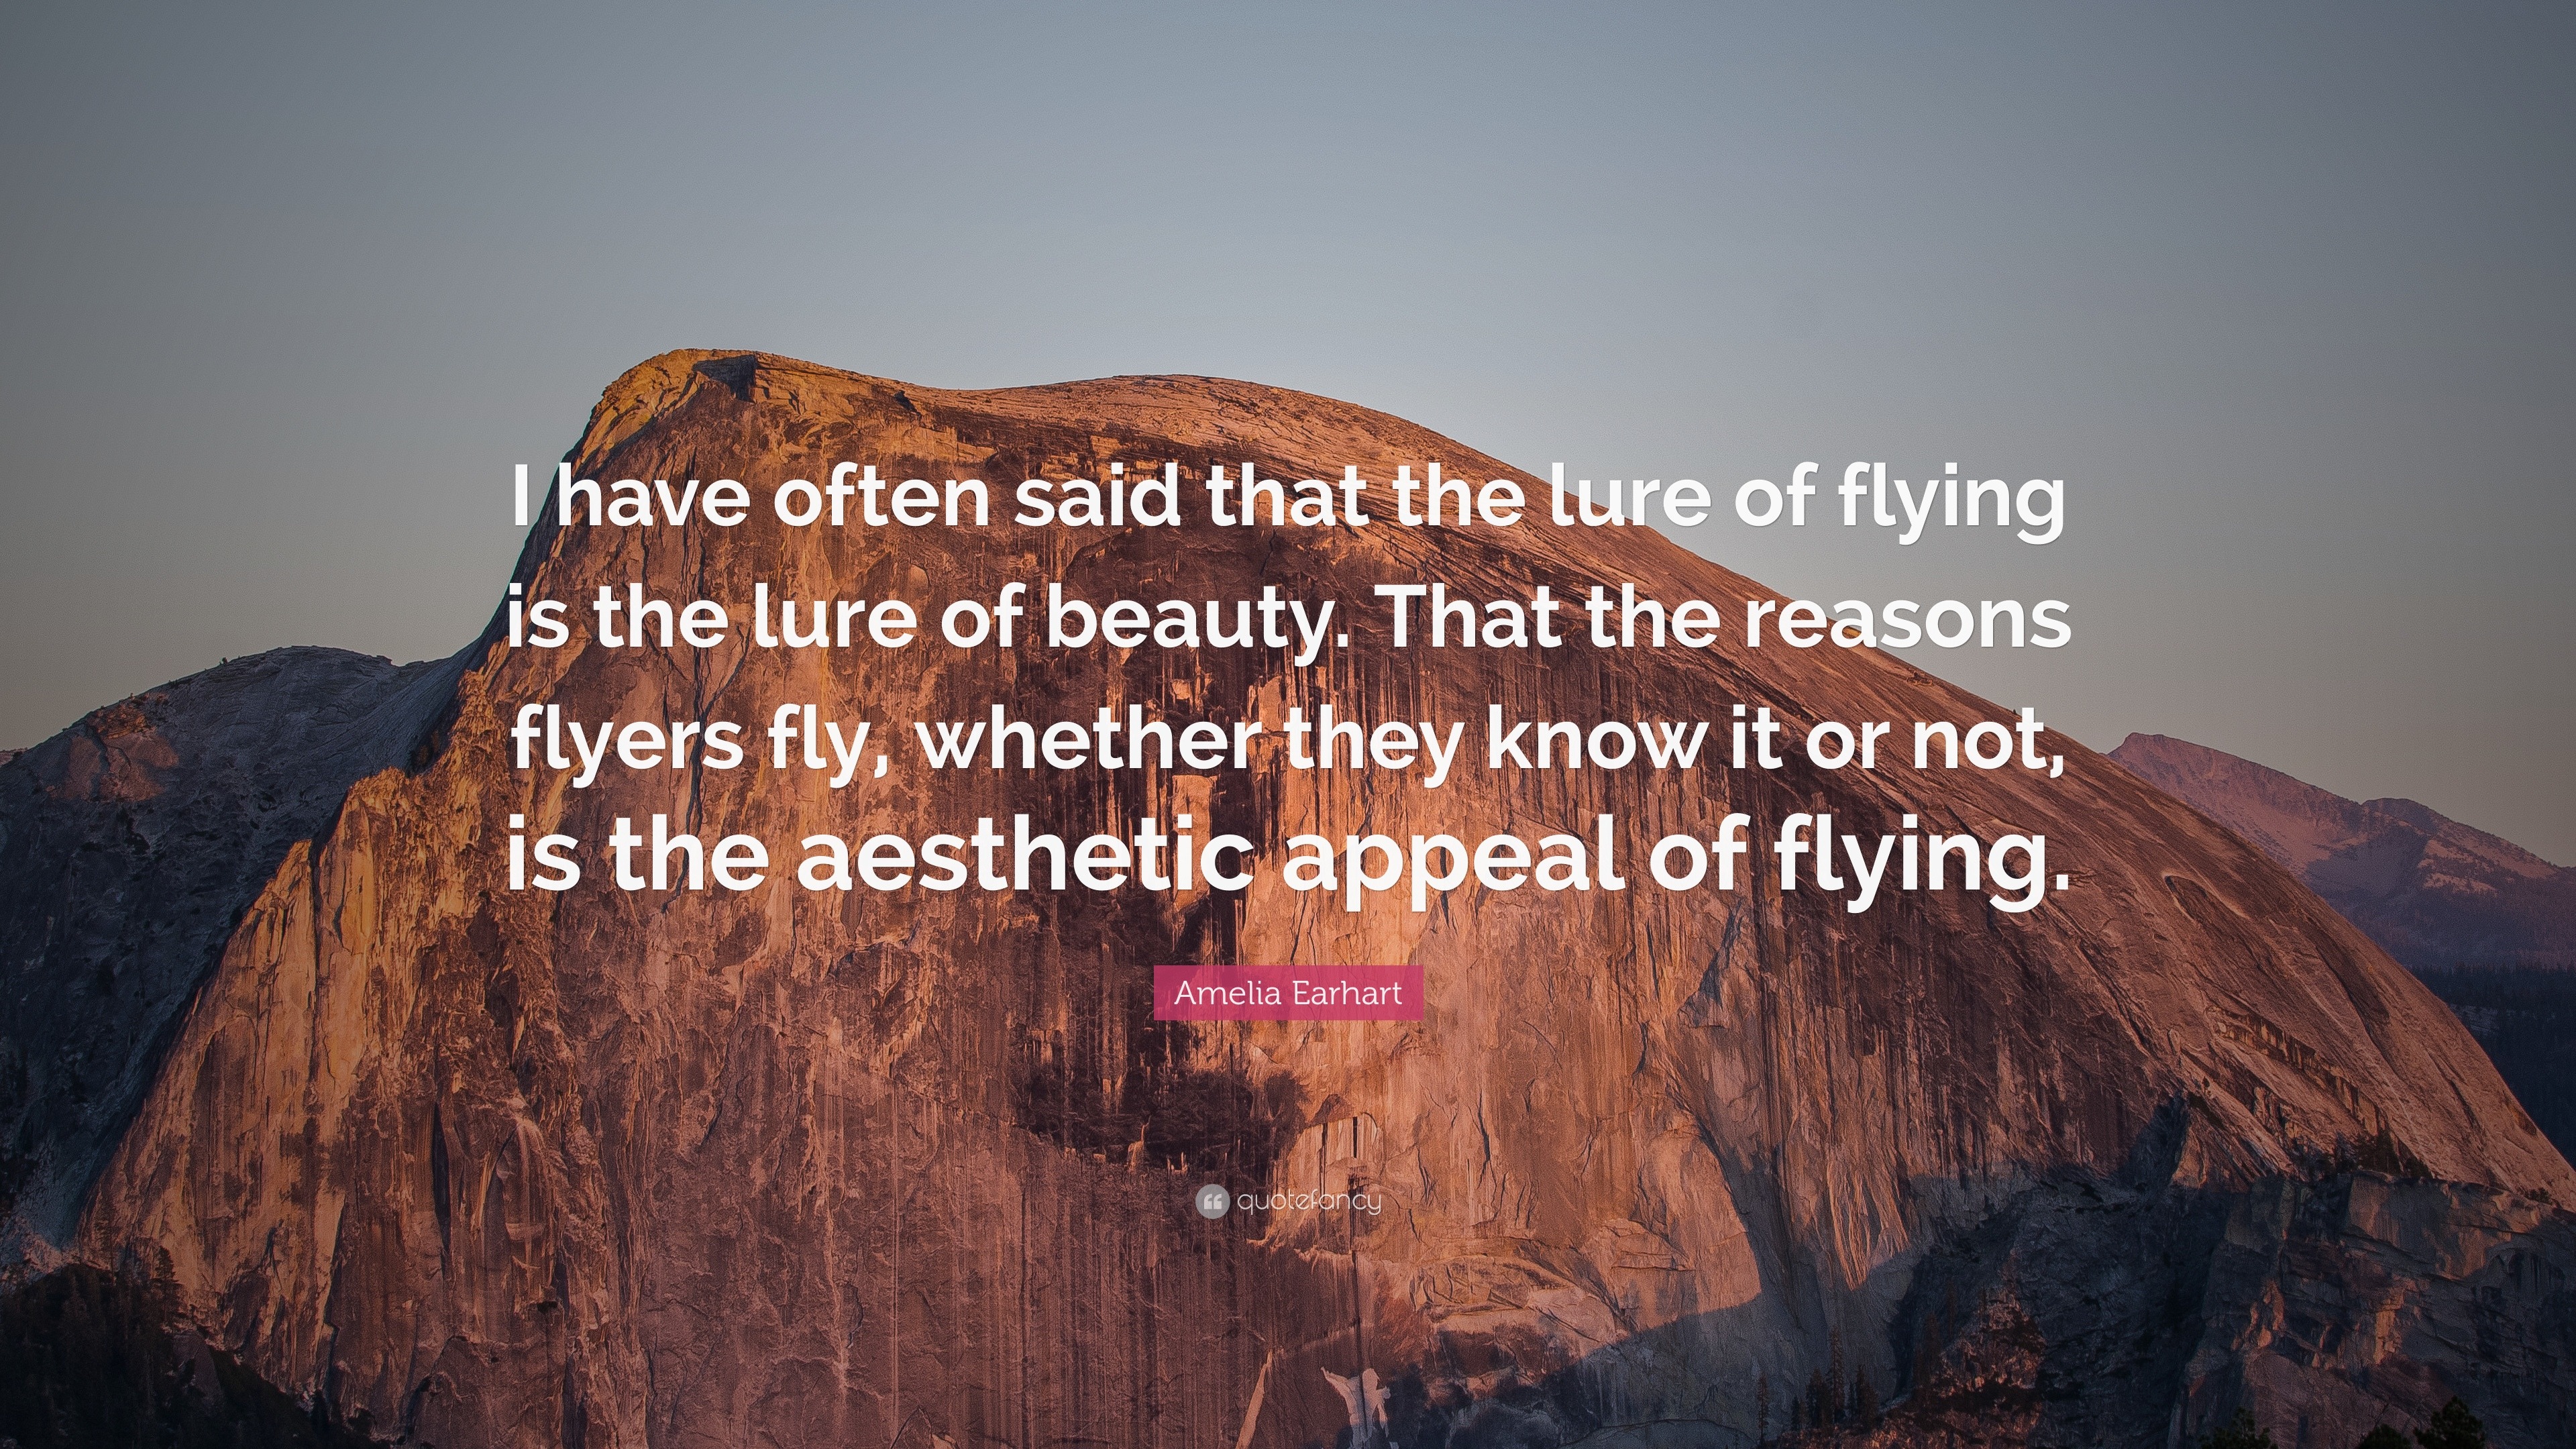 Amelia Earhart Quote: “I have often said that the lure of flying